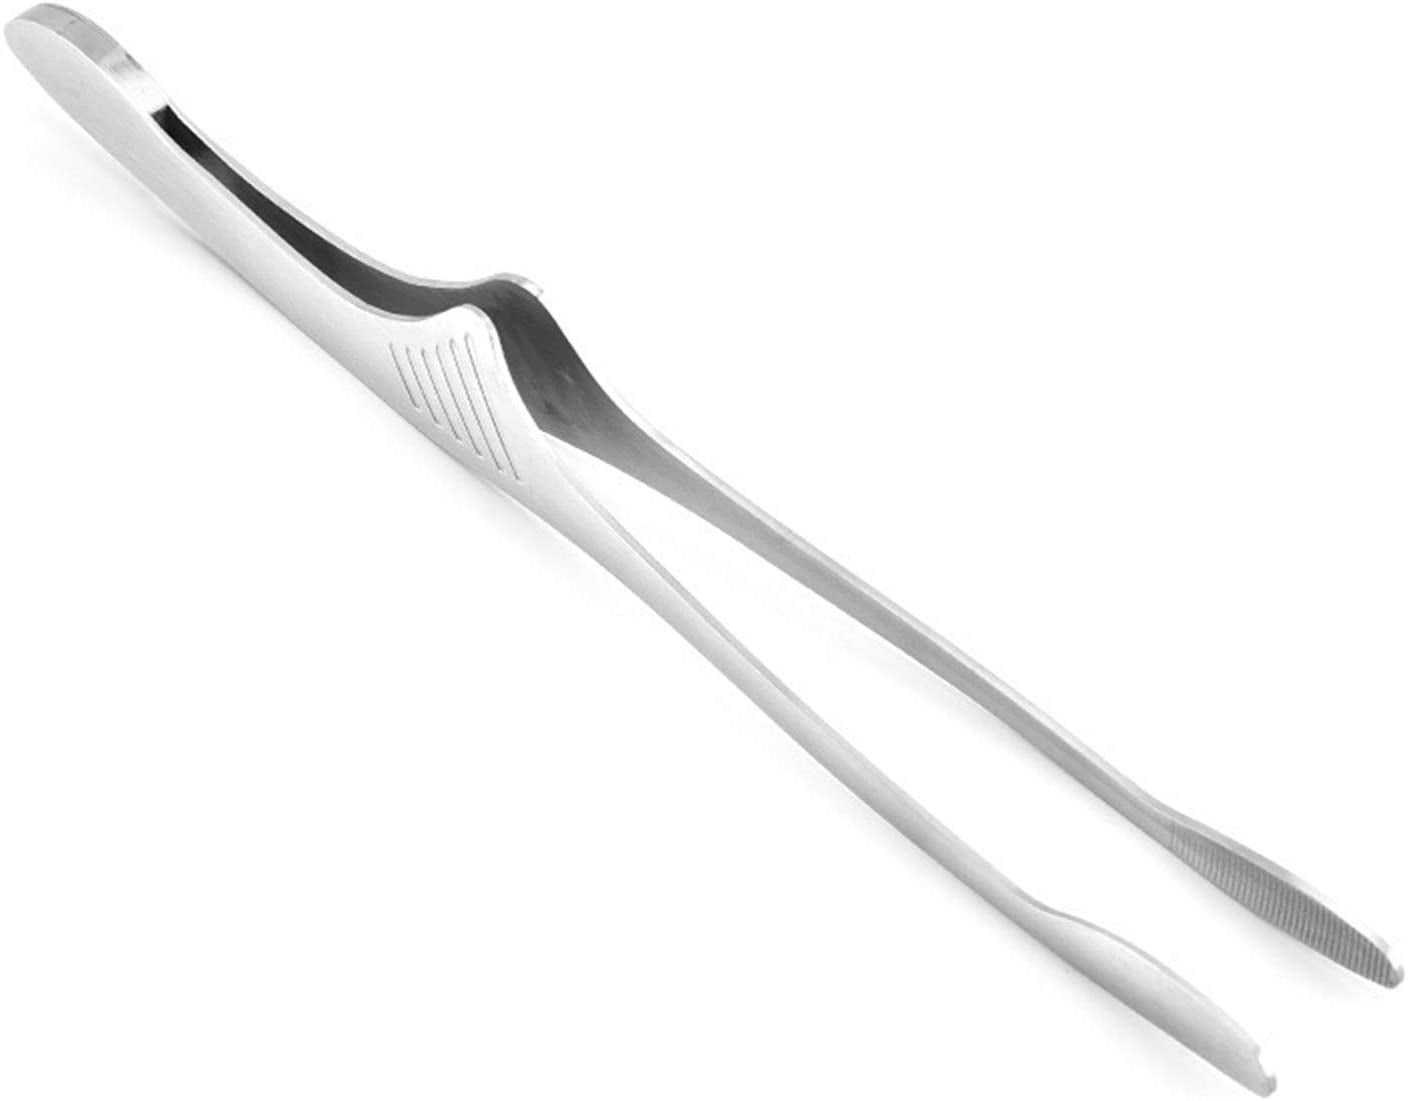 1X Barbecue Tongs Food Clip Stainless Steel Long Straight Tweezer Kitchen Silver 